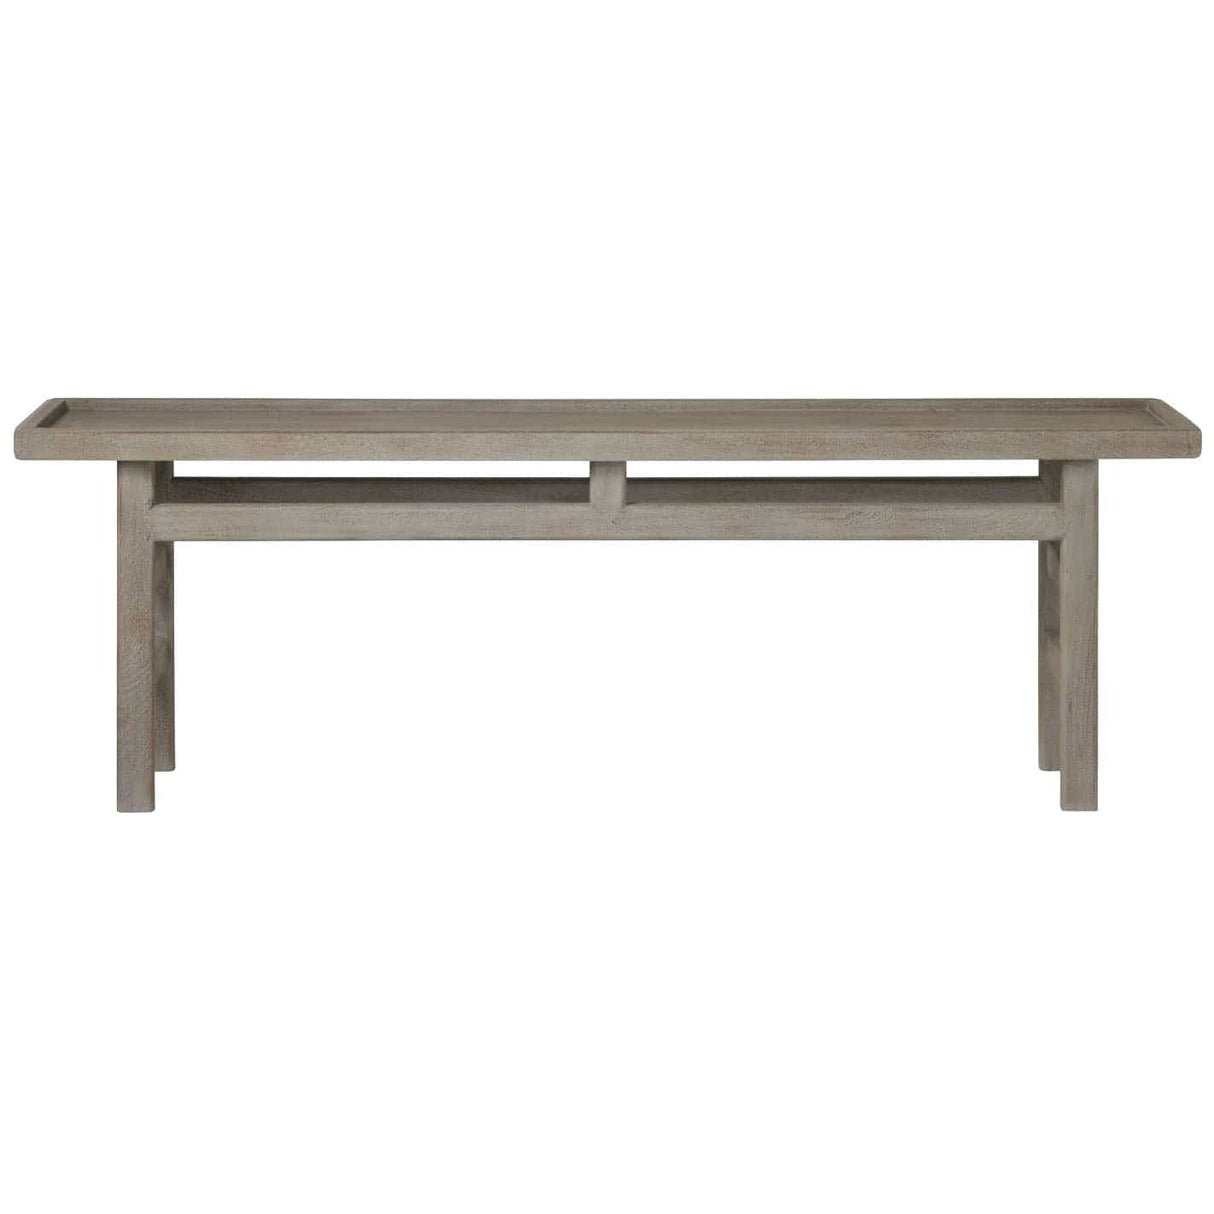 Made Goods Malachi Console Table Furniture made-goods-FURMALACHCON9620LG